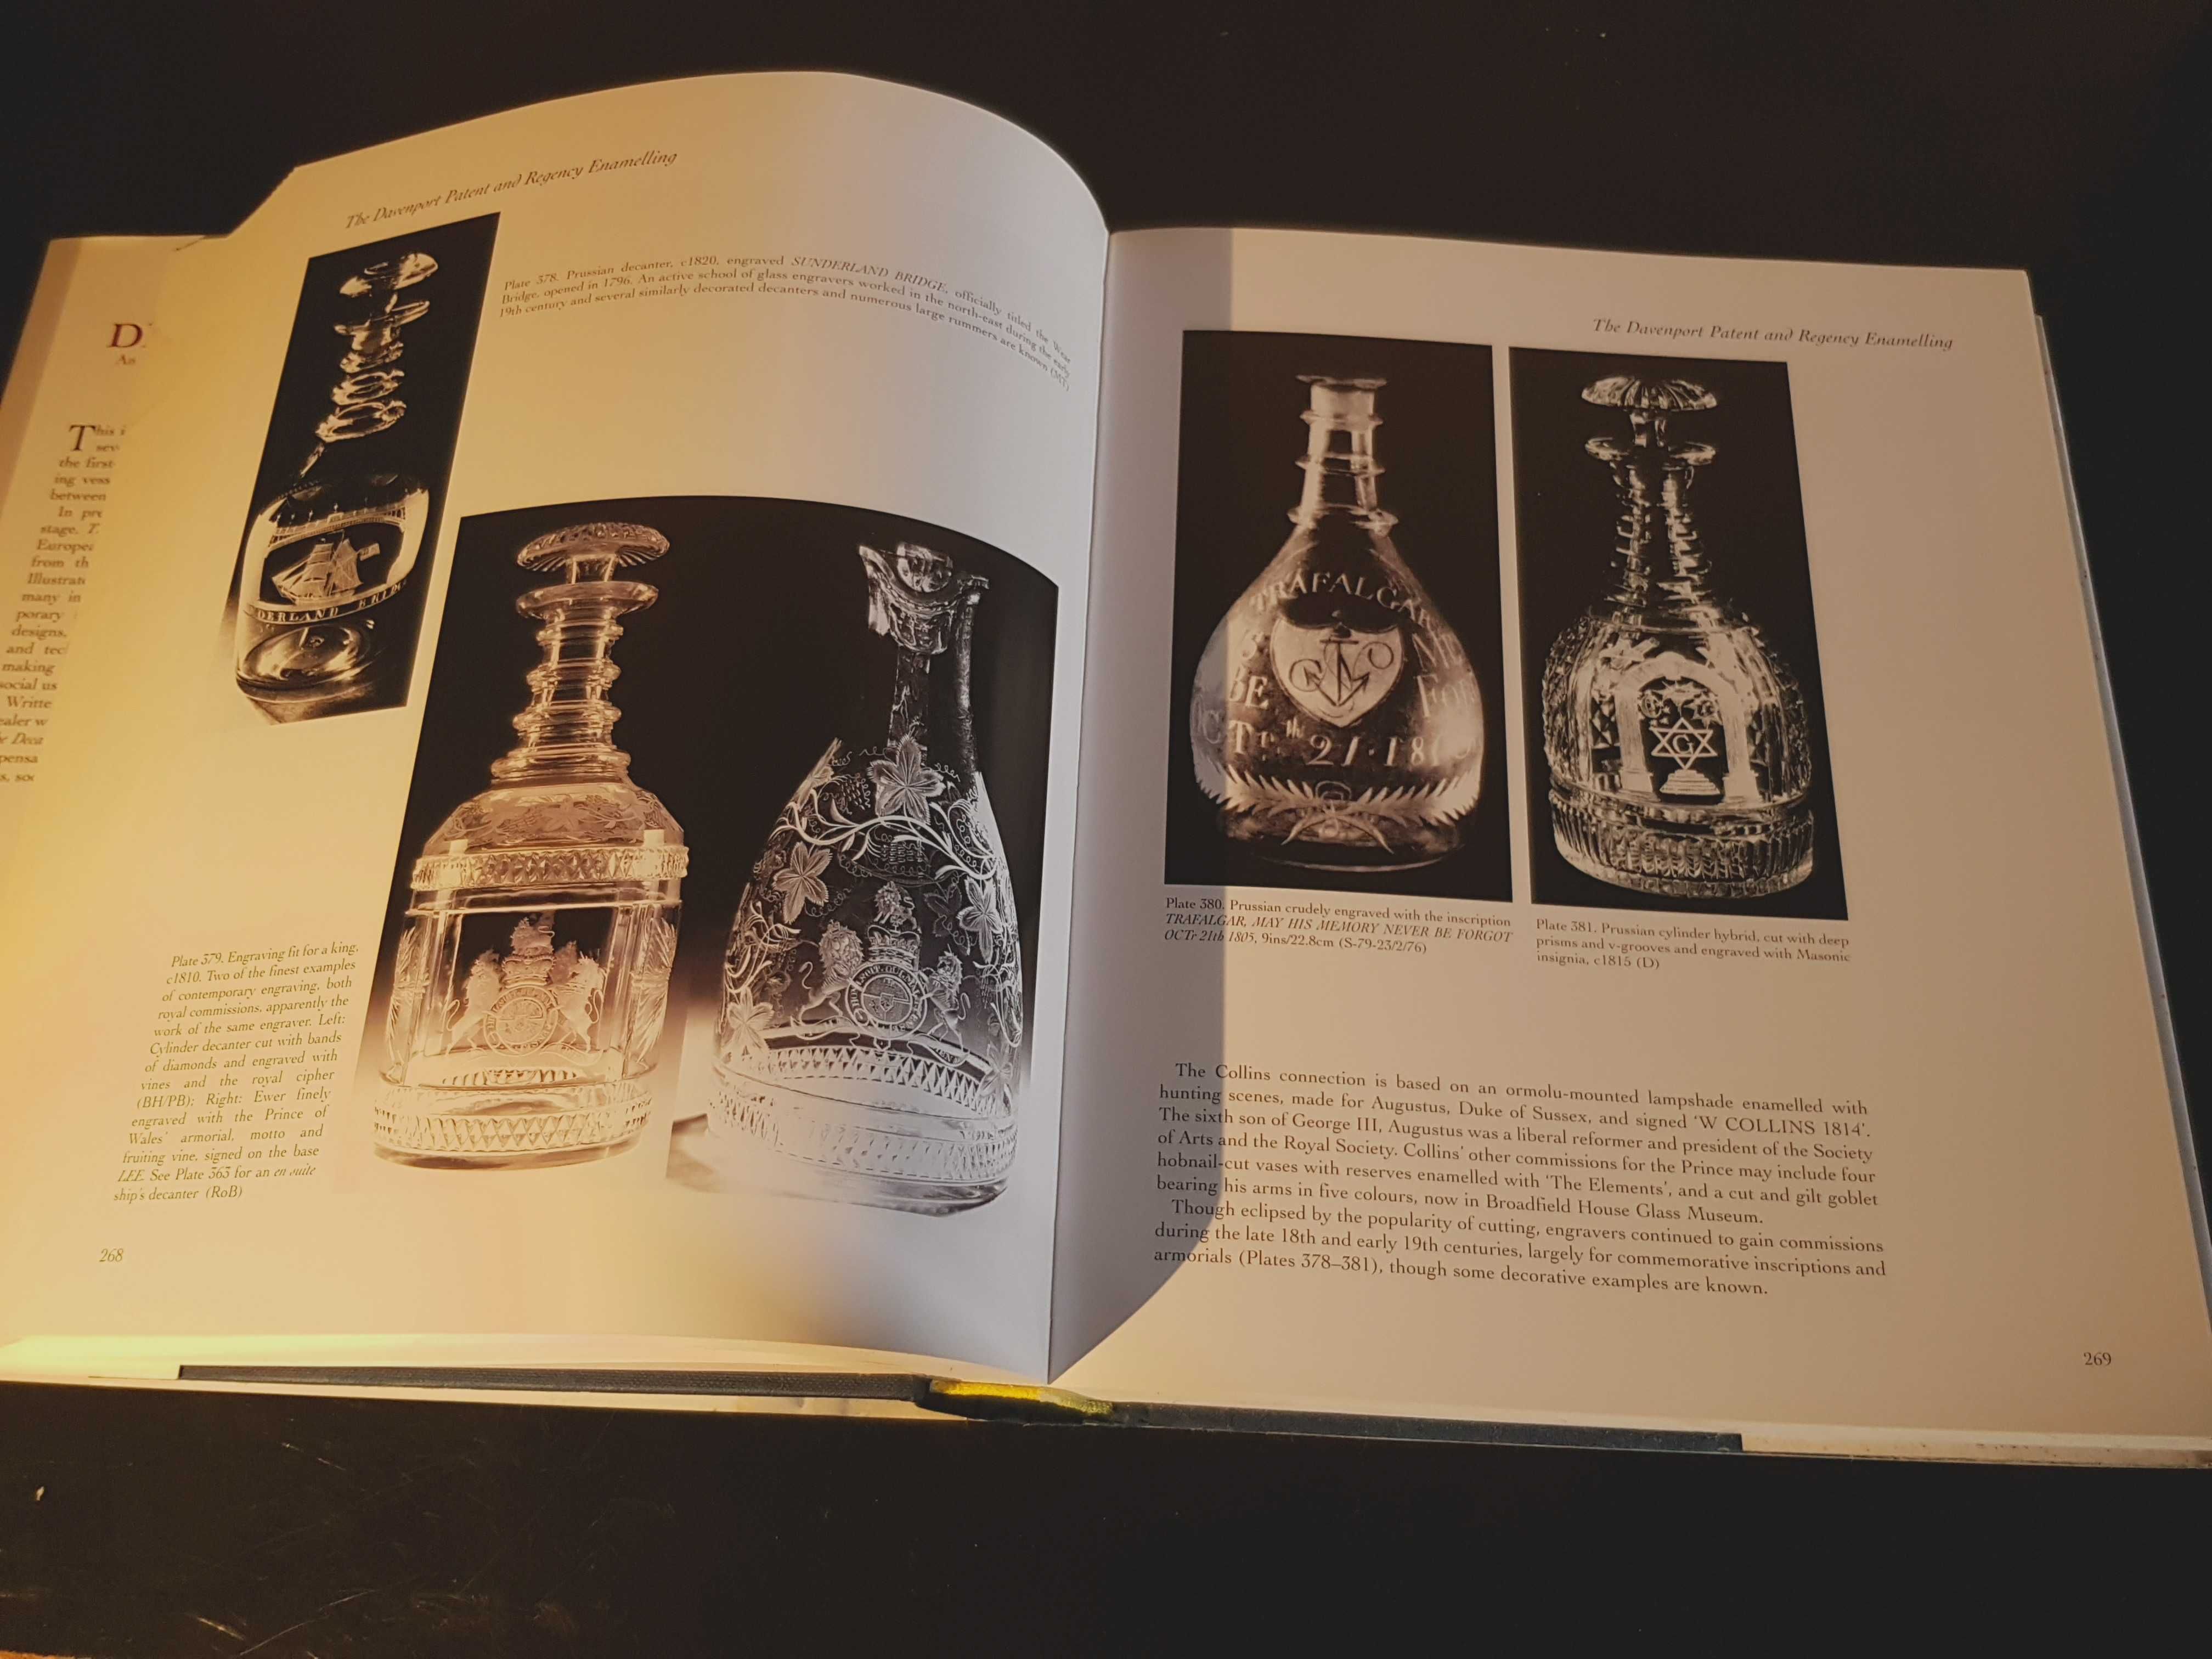 The Decanter - An Illustrated History of Glass from 1650–1950